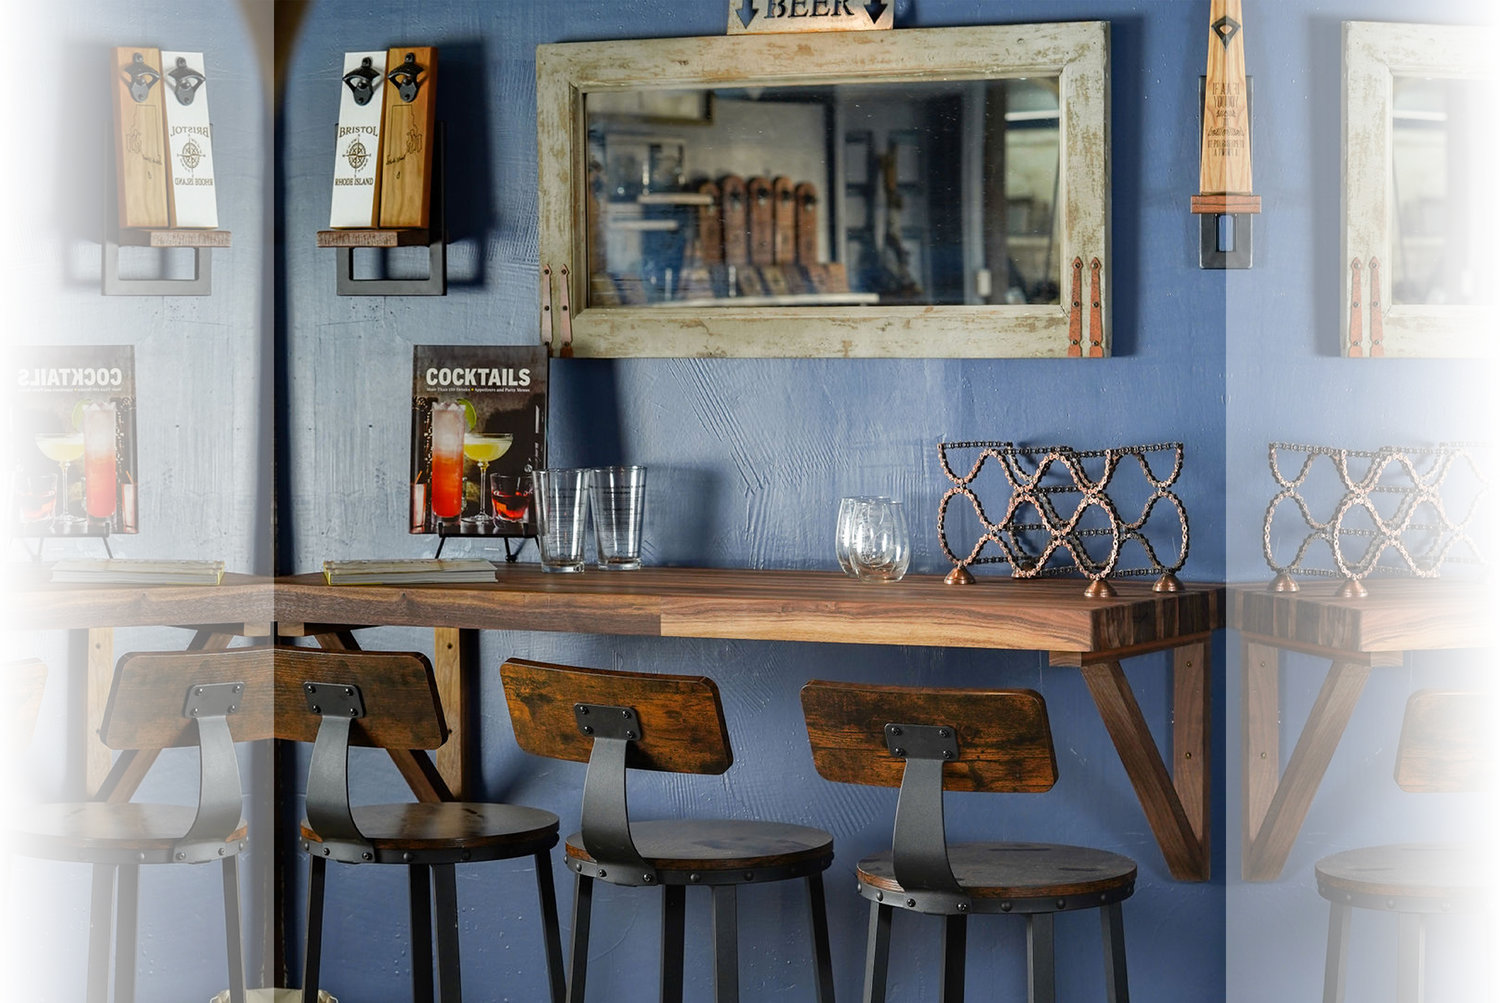 A rustic wall shelf is styled to entertain ideas